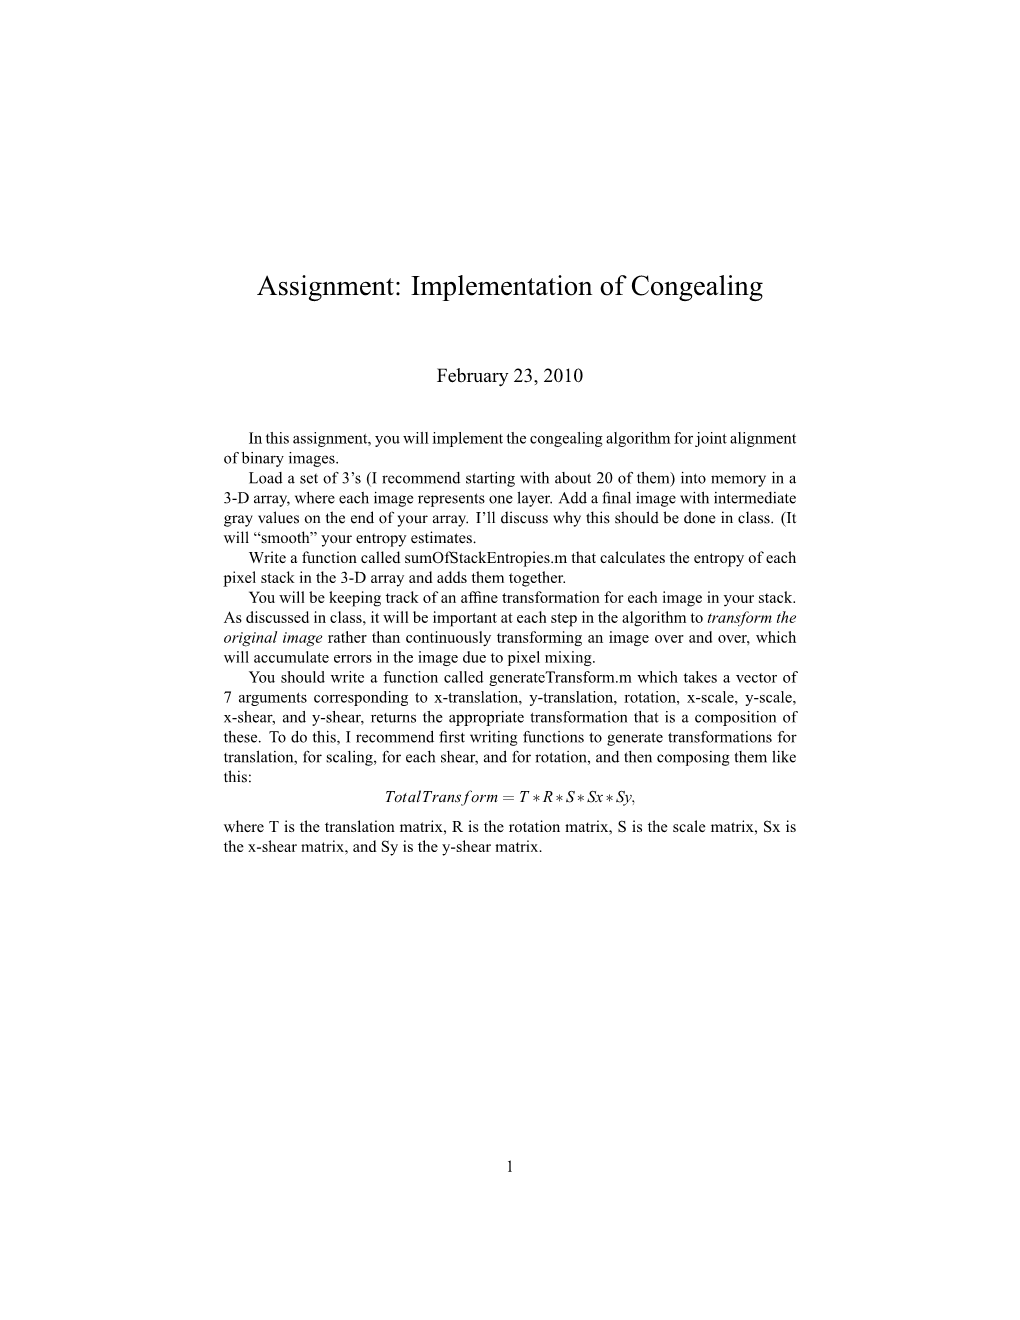 Assignment: Implementation of Congealing